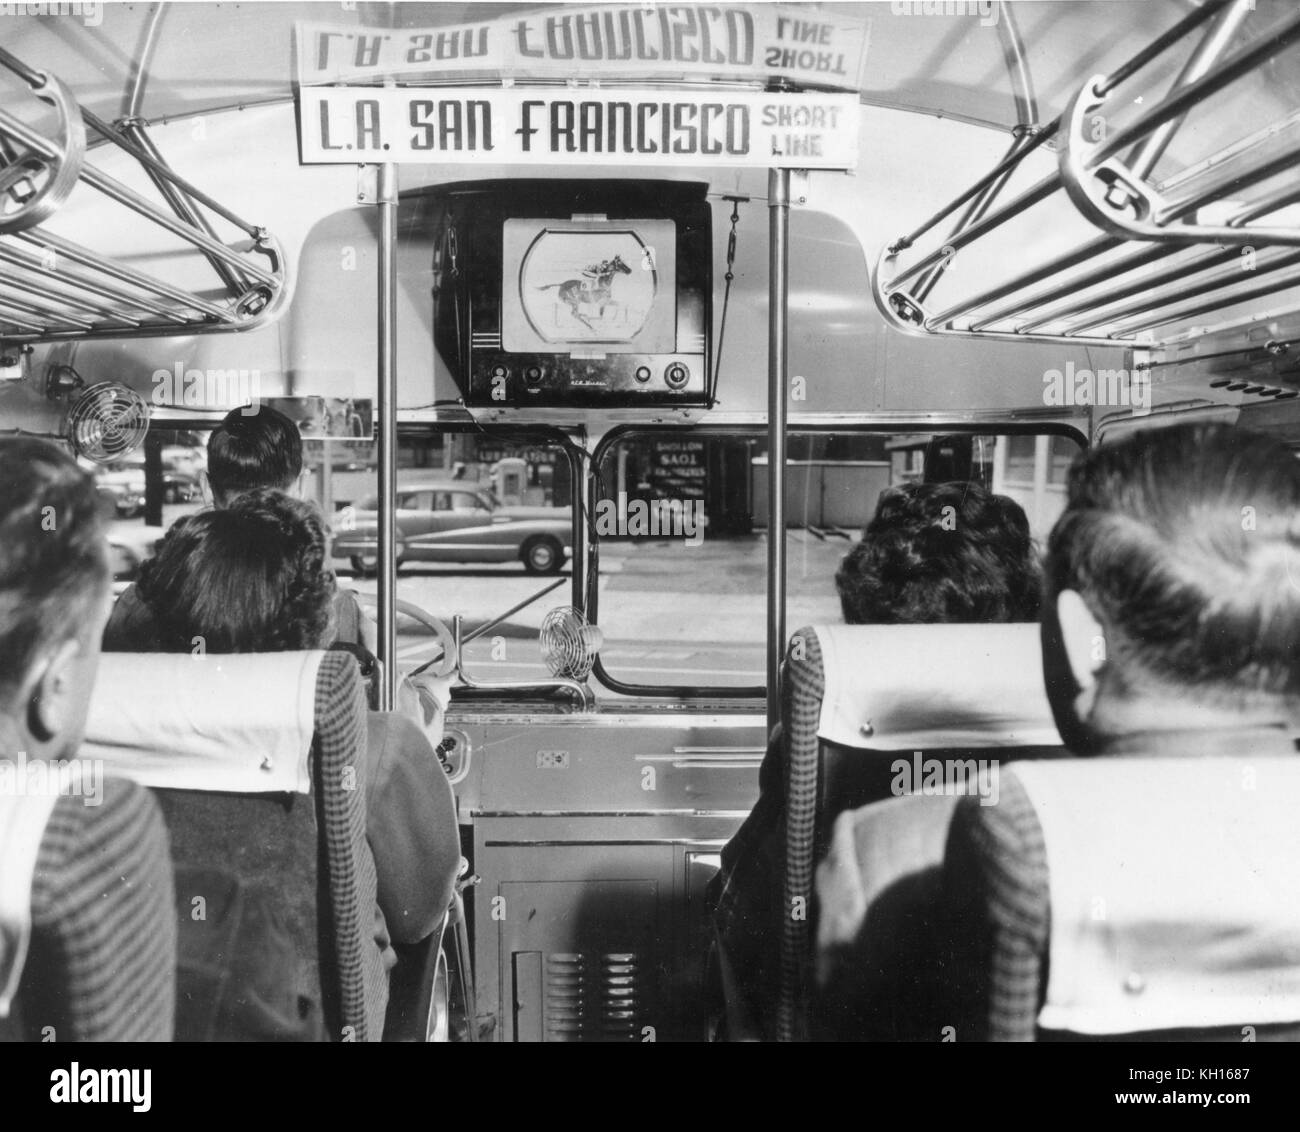 A television set is operated to entertain passengers on a bus making the Los Angeles to San Francisco run. The screen is positioned so the bus driver cannot see the set. August/1950. Stock Photo